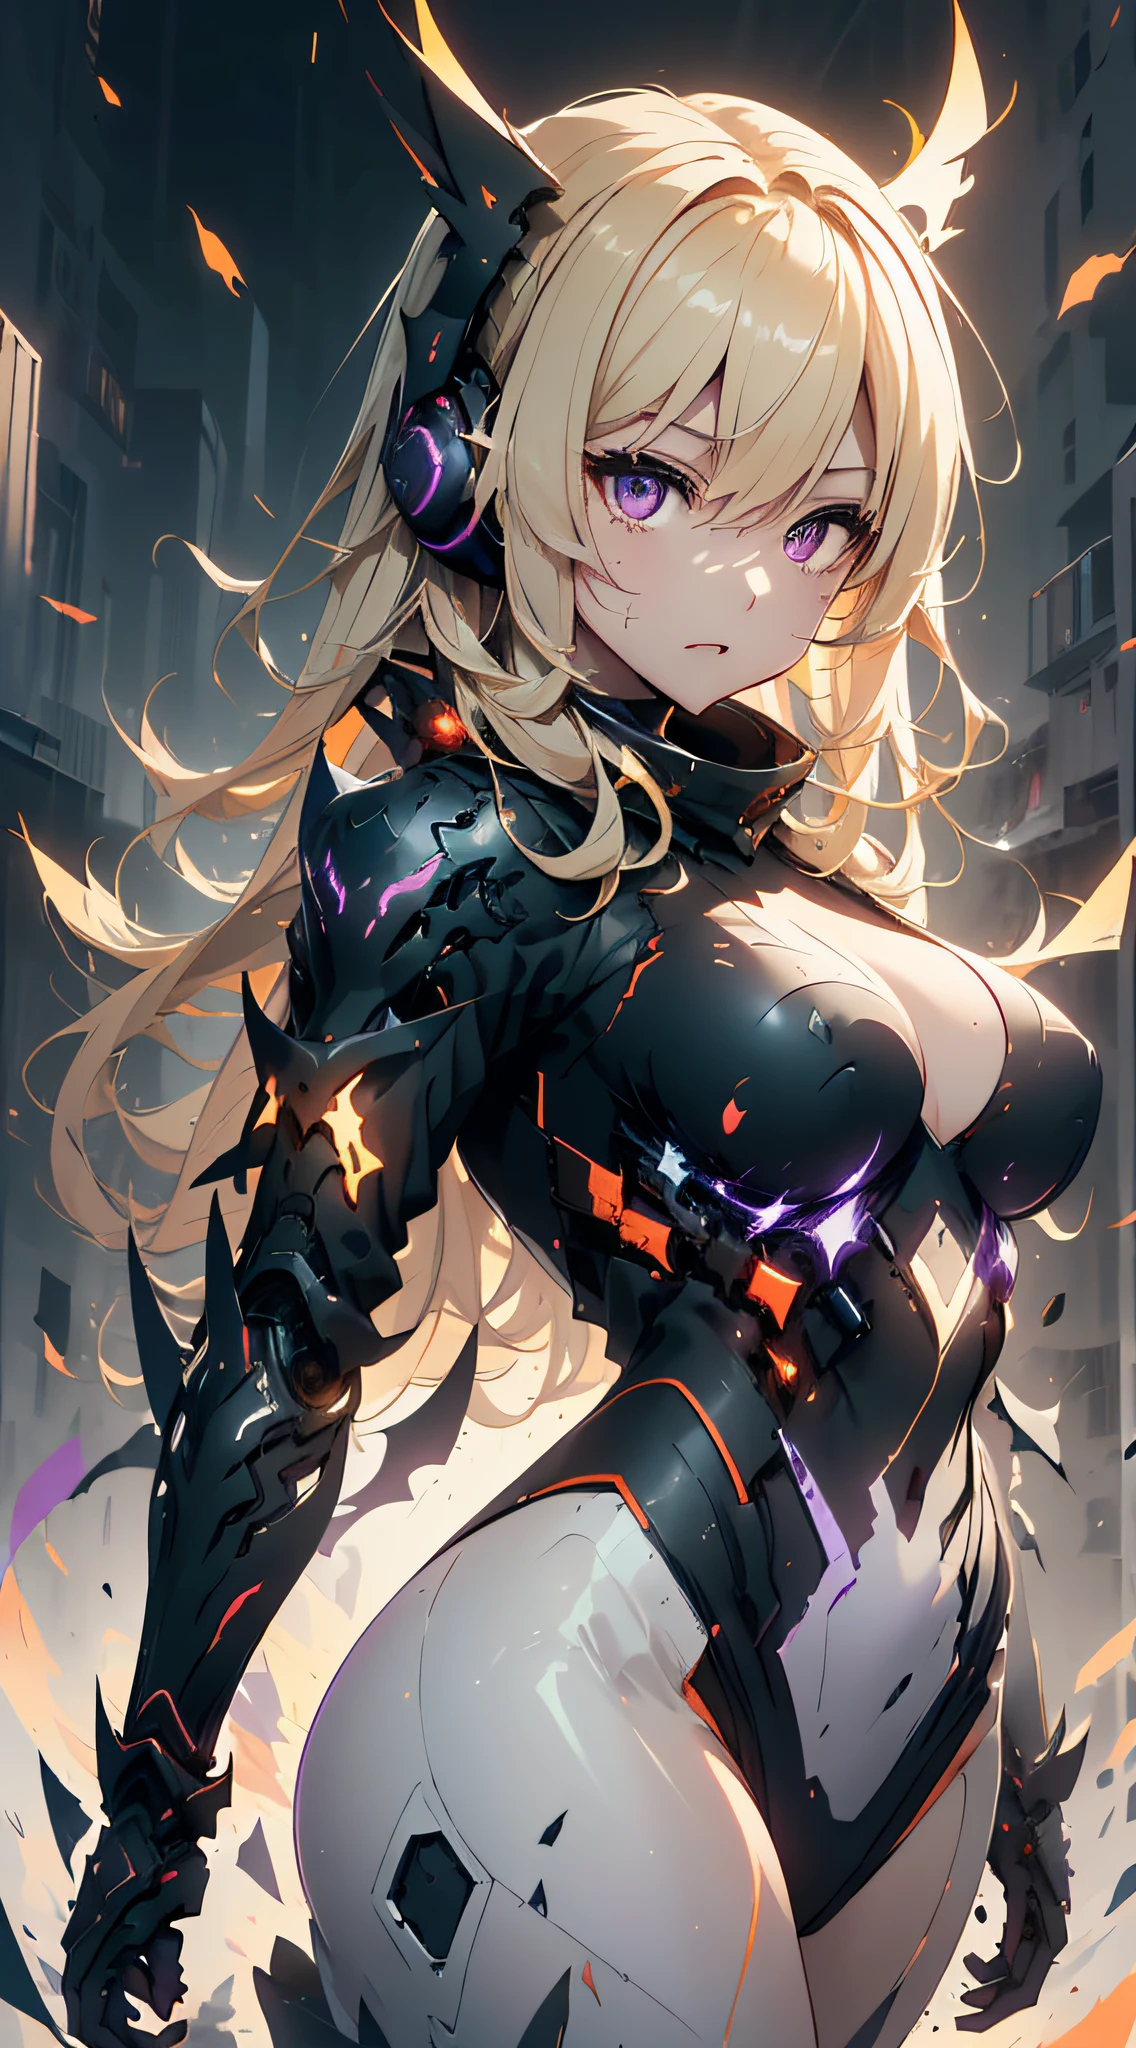 top-quality、Top image quality、​masterpiece、girl with((White suit、glowing mechanic suit、18year old、teen ager、cute little、Best Bust、big bast,Beautiful shining purple eyes、Breasts wide open, a blond、Longhaire、A slender,Large valleys、belligerent movements,sharp claws、With sniper rifle、head phone、black bright wings、fighting poses、being filmed、splatters、Feeling of sprinting)),hiquality、Beautiful Art、Background with((Space Battlefield)))、Depth(planet earth）,masutepiece、depth of fields,Cinematic style